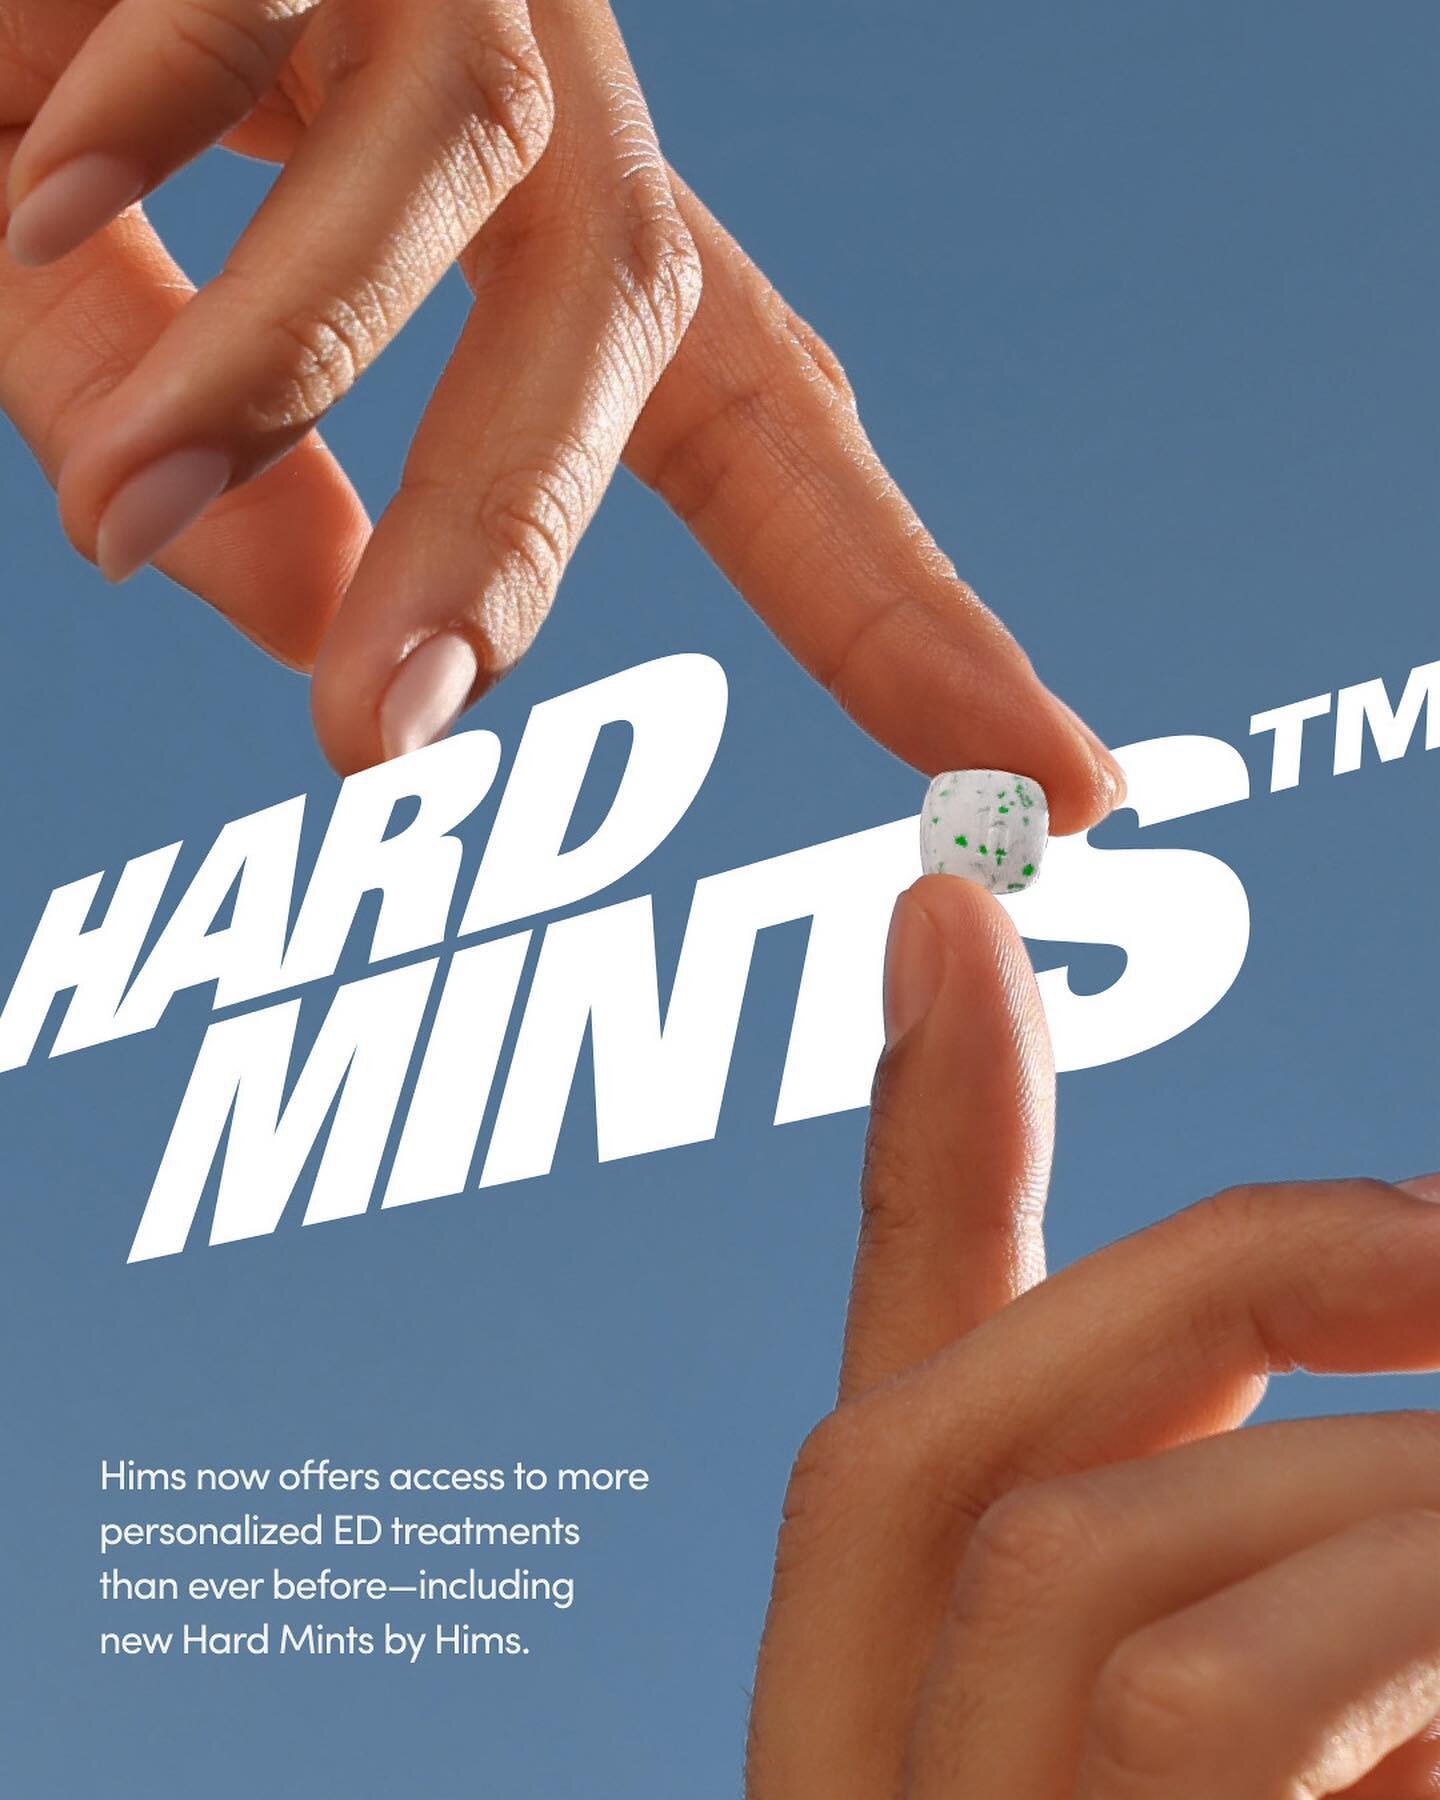 We go hard. 
⠀⠀⠀⠀⠀⠀⠀⠀⠀
@hims Hard Mints campaign shot by @alimitton @apostrophereps, produced by #peppermade

Thank you for having us @jacfodor